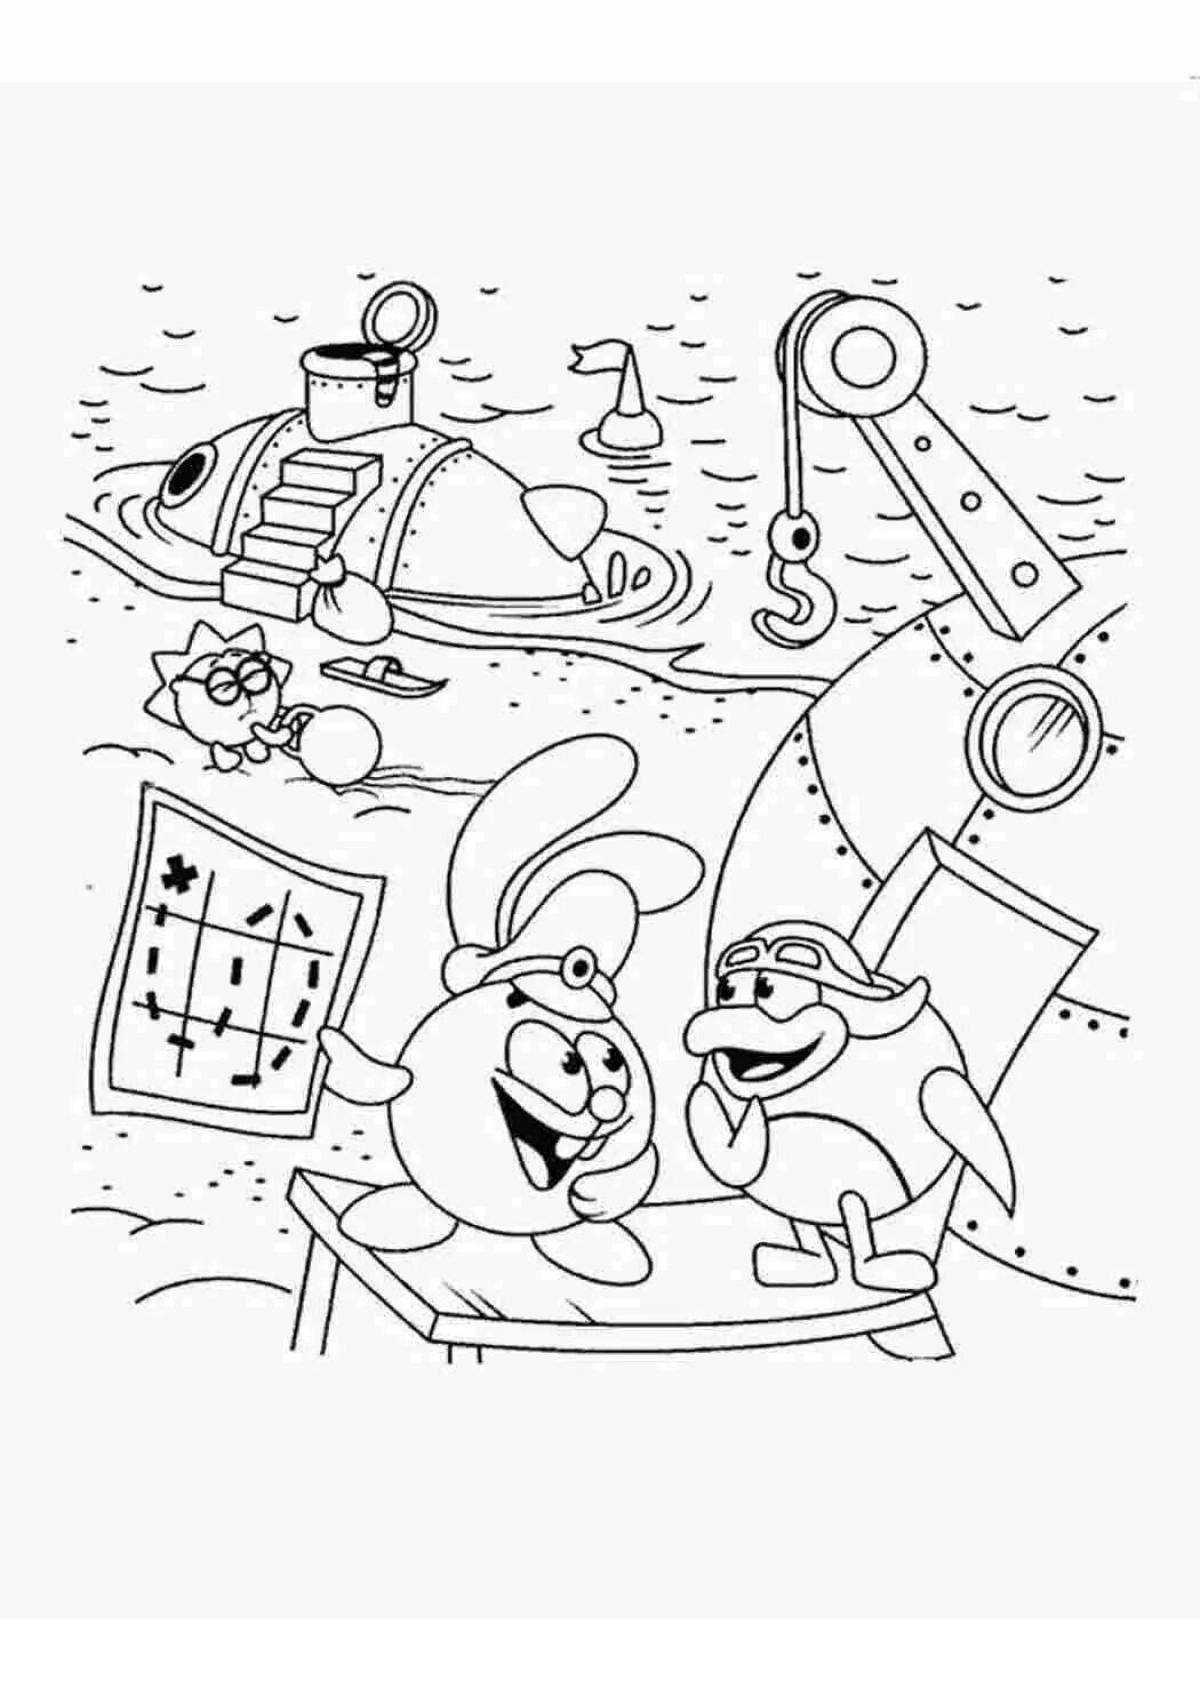 Inviting Smeshariki coloring pages